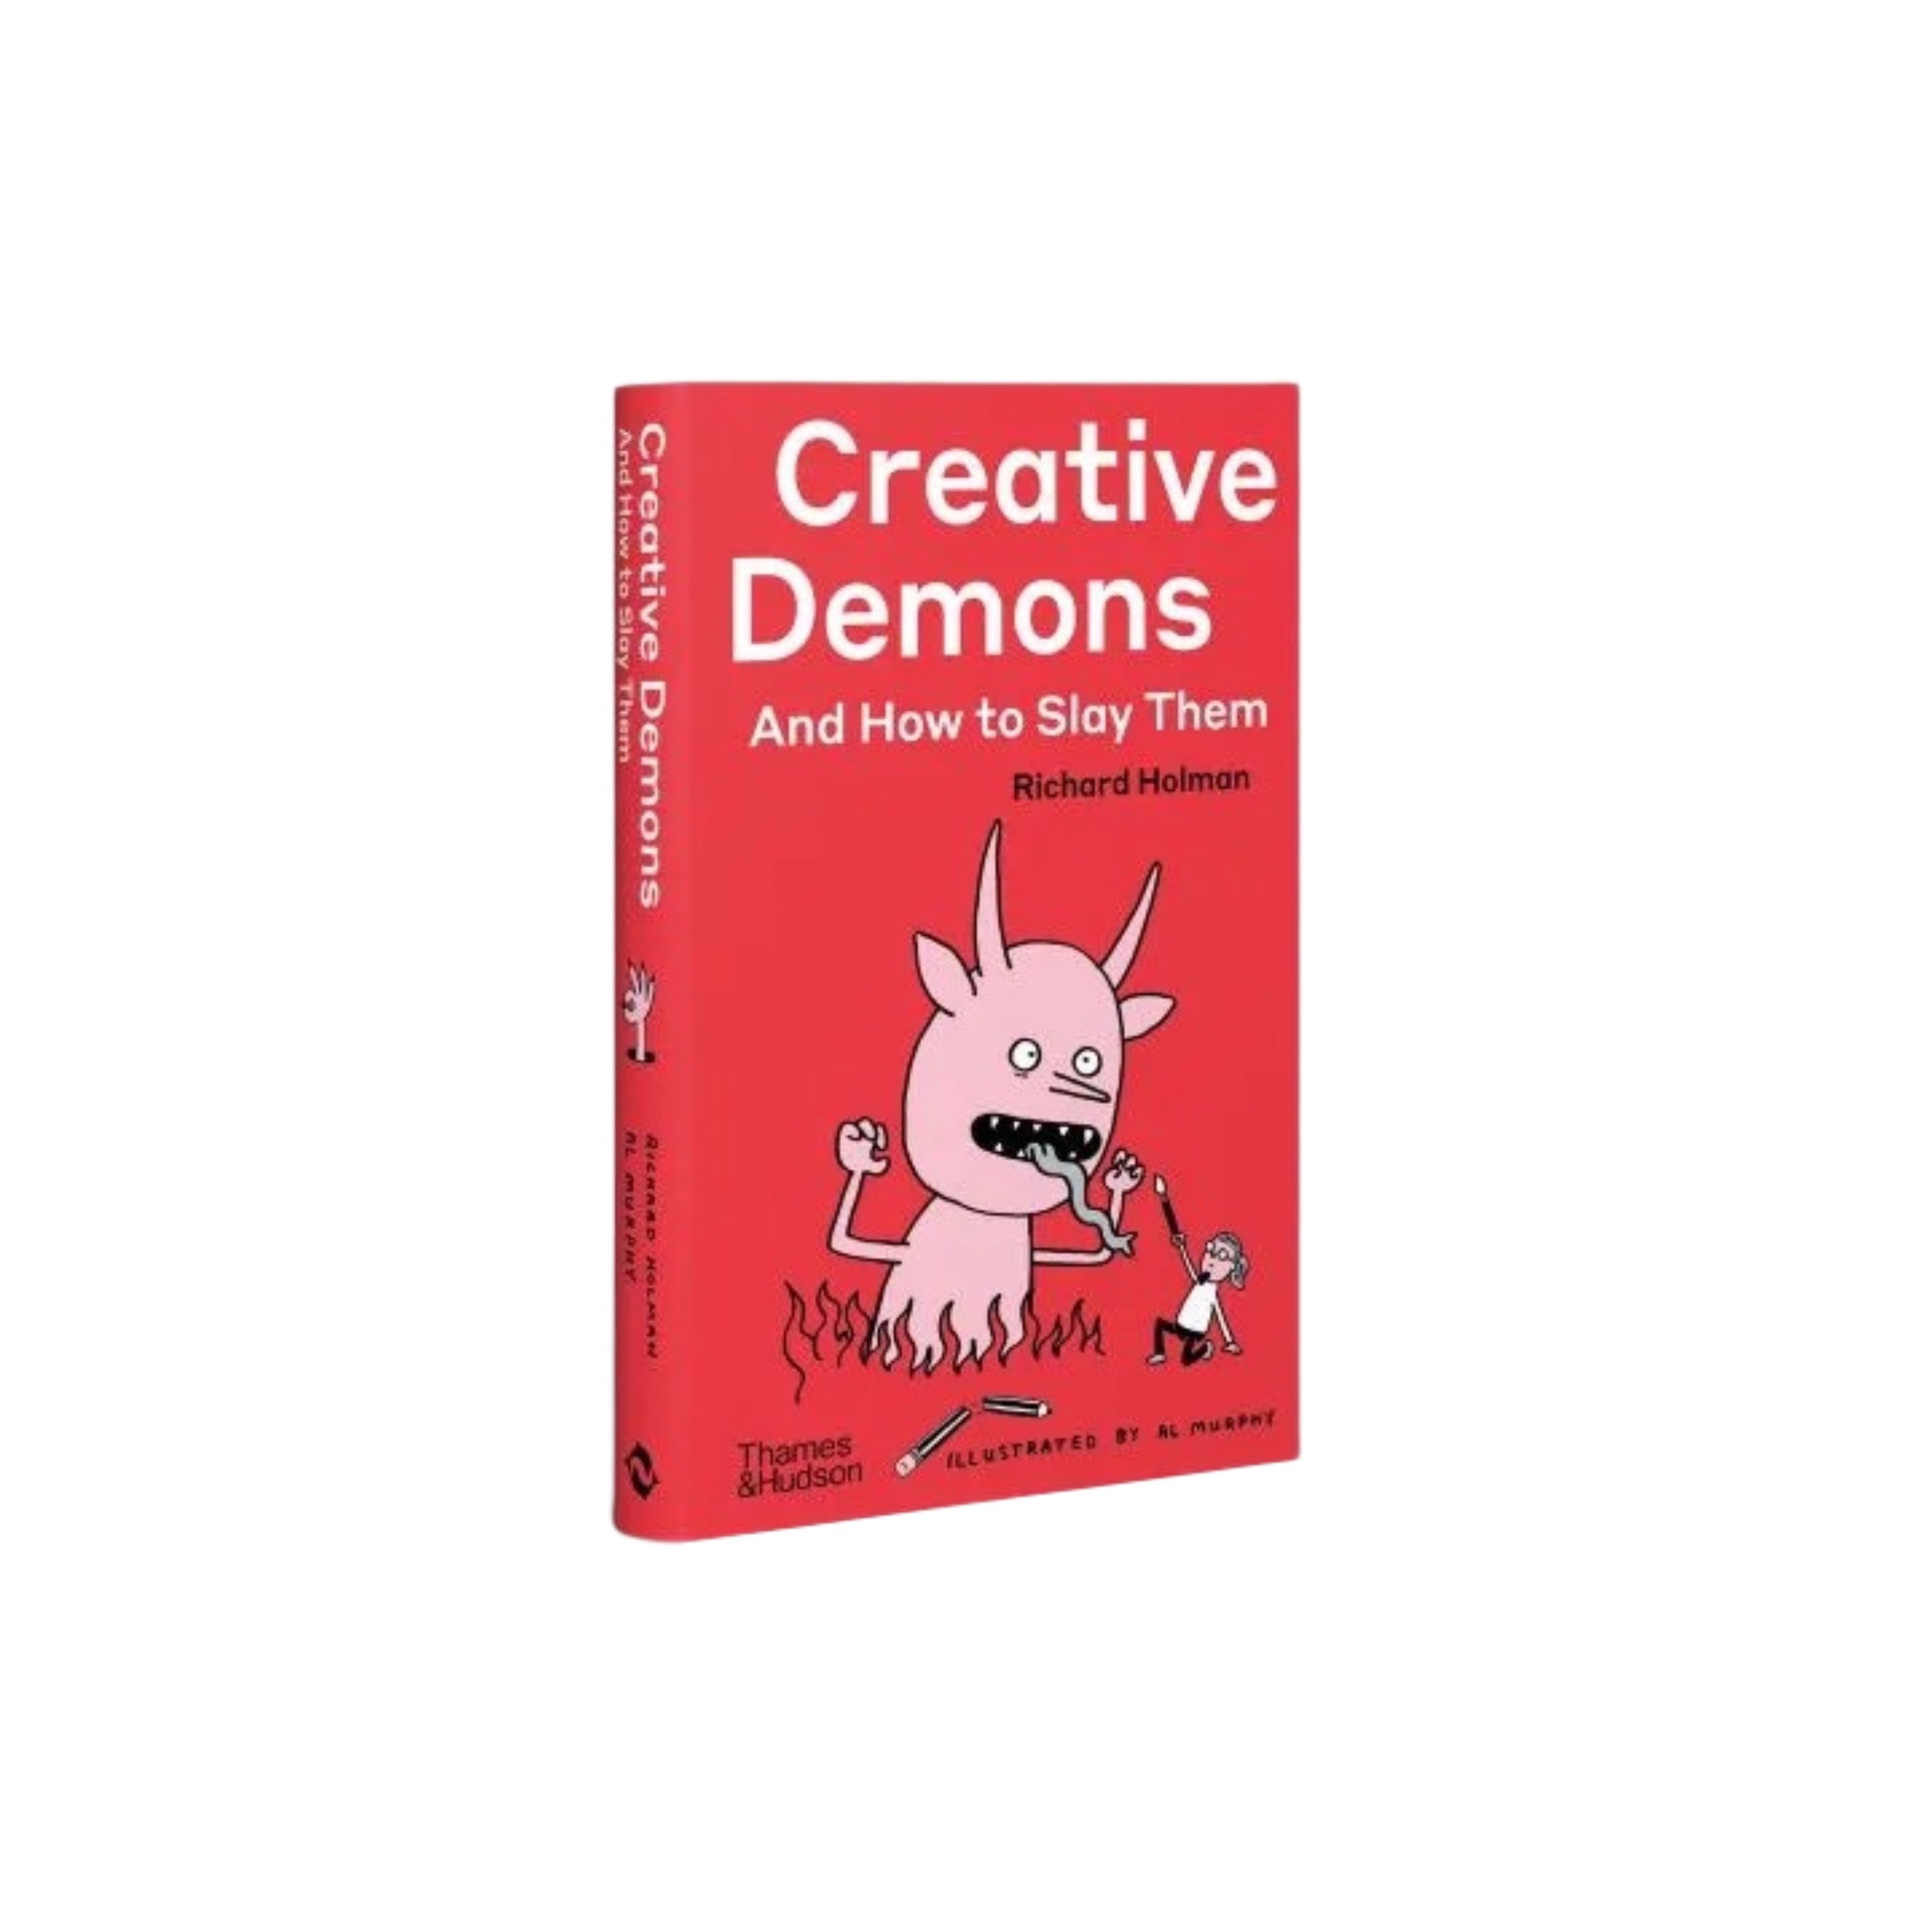 Writers and Creatives - 5 Book Bundle